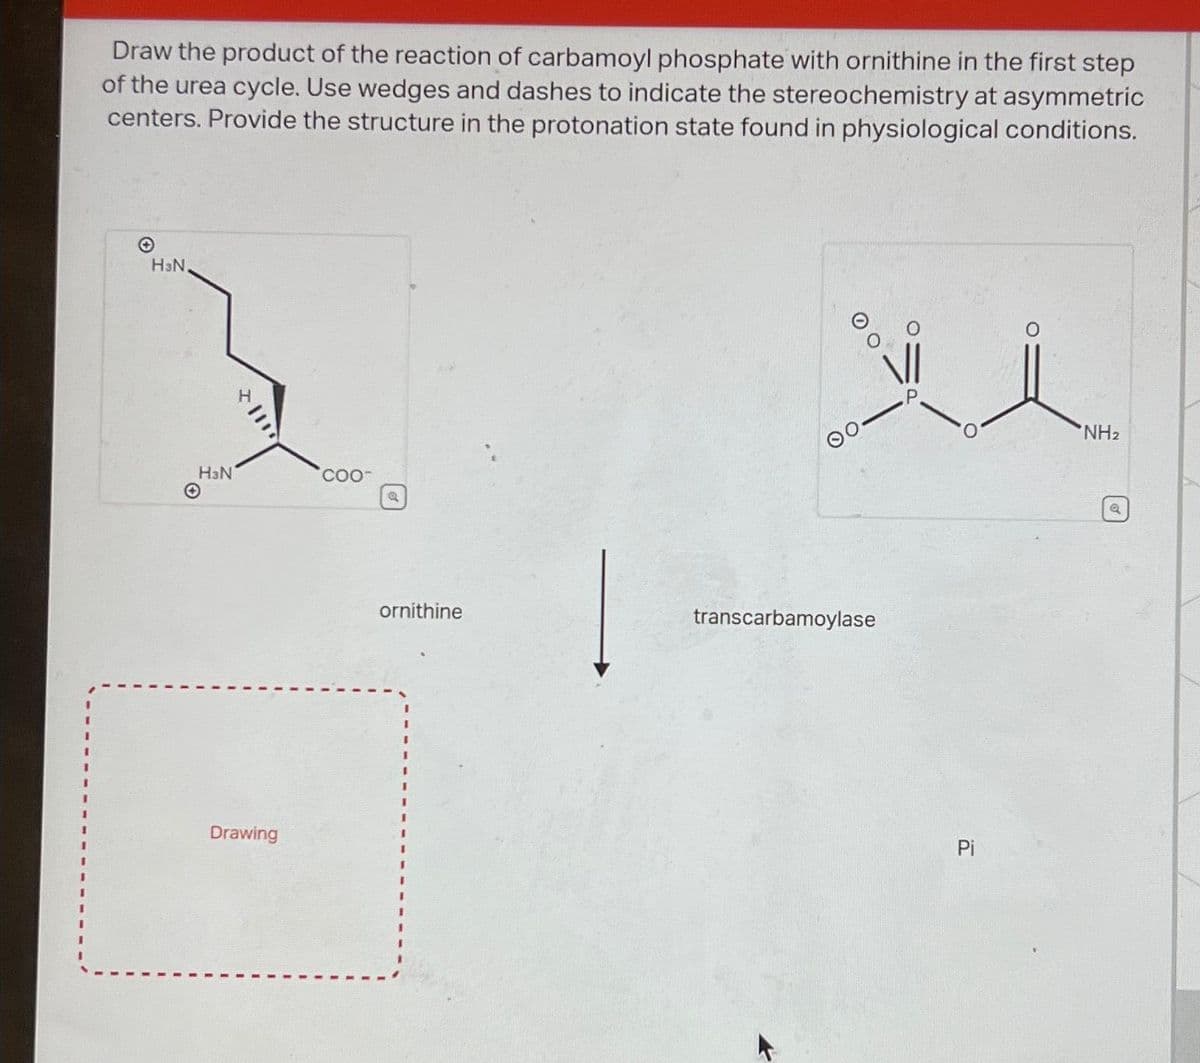 Draw the product of the reaction of carbamoyl phosphate with ornithine in the first step
of the urea cycle. Use wedges and dashes to indicate the stereochemistry at asymmetric
centers. Provide the structure in the protonation state found in physiological conditions.
H³N,
H3N
Drawing
coo-
Q
ornithine
transcarbamoylase
Pi
NH₂
Q